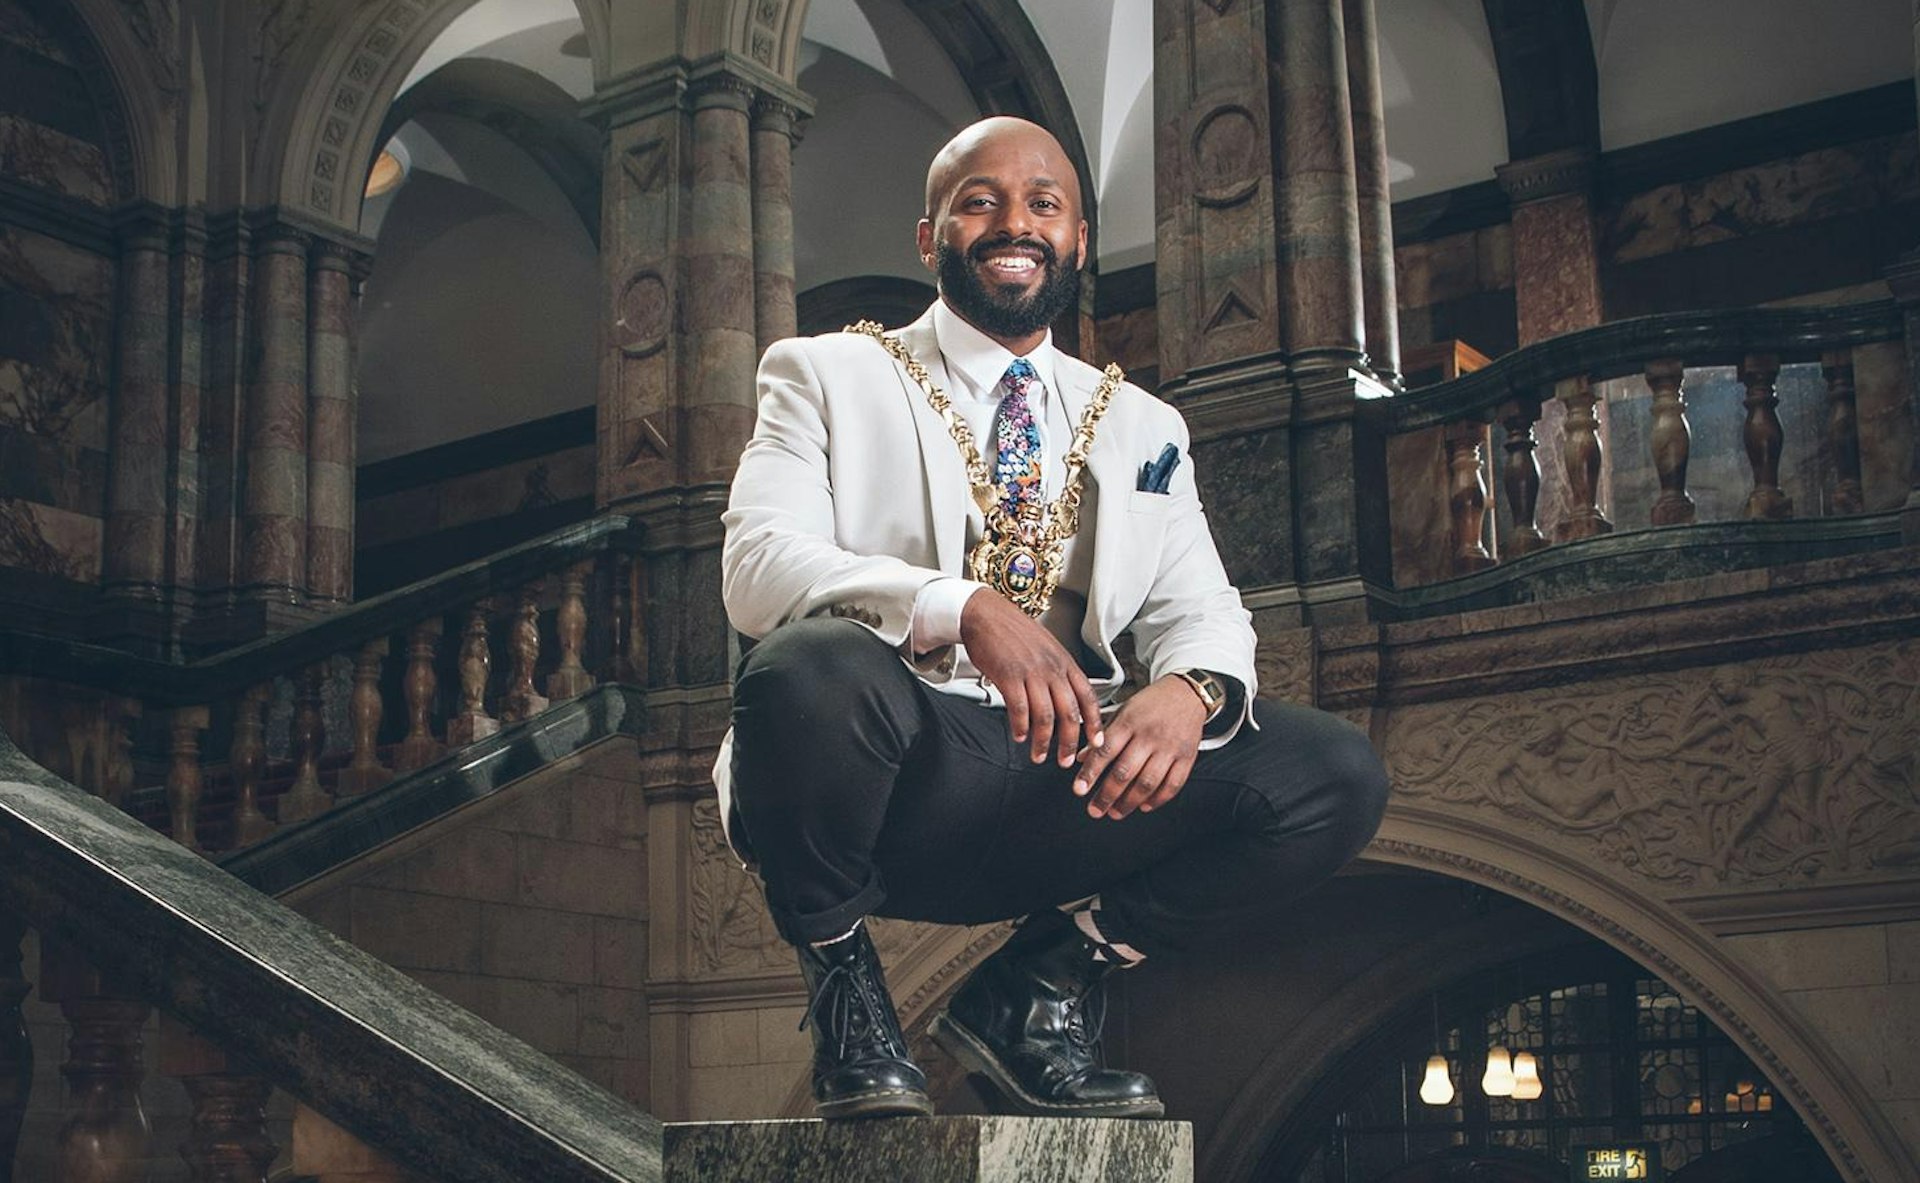 How to make a difference in politics, with Magid Magid